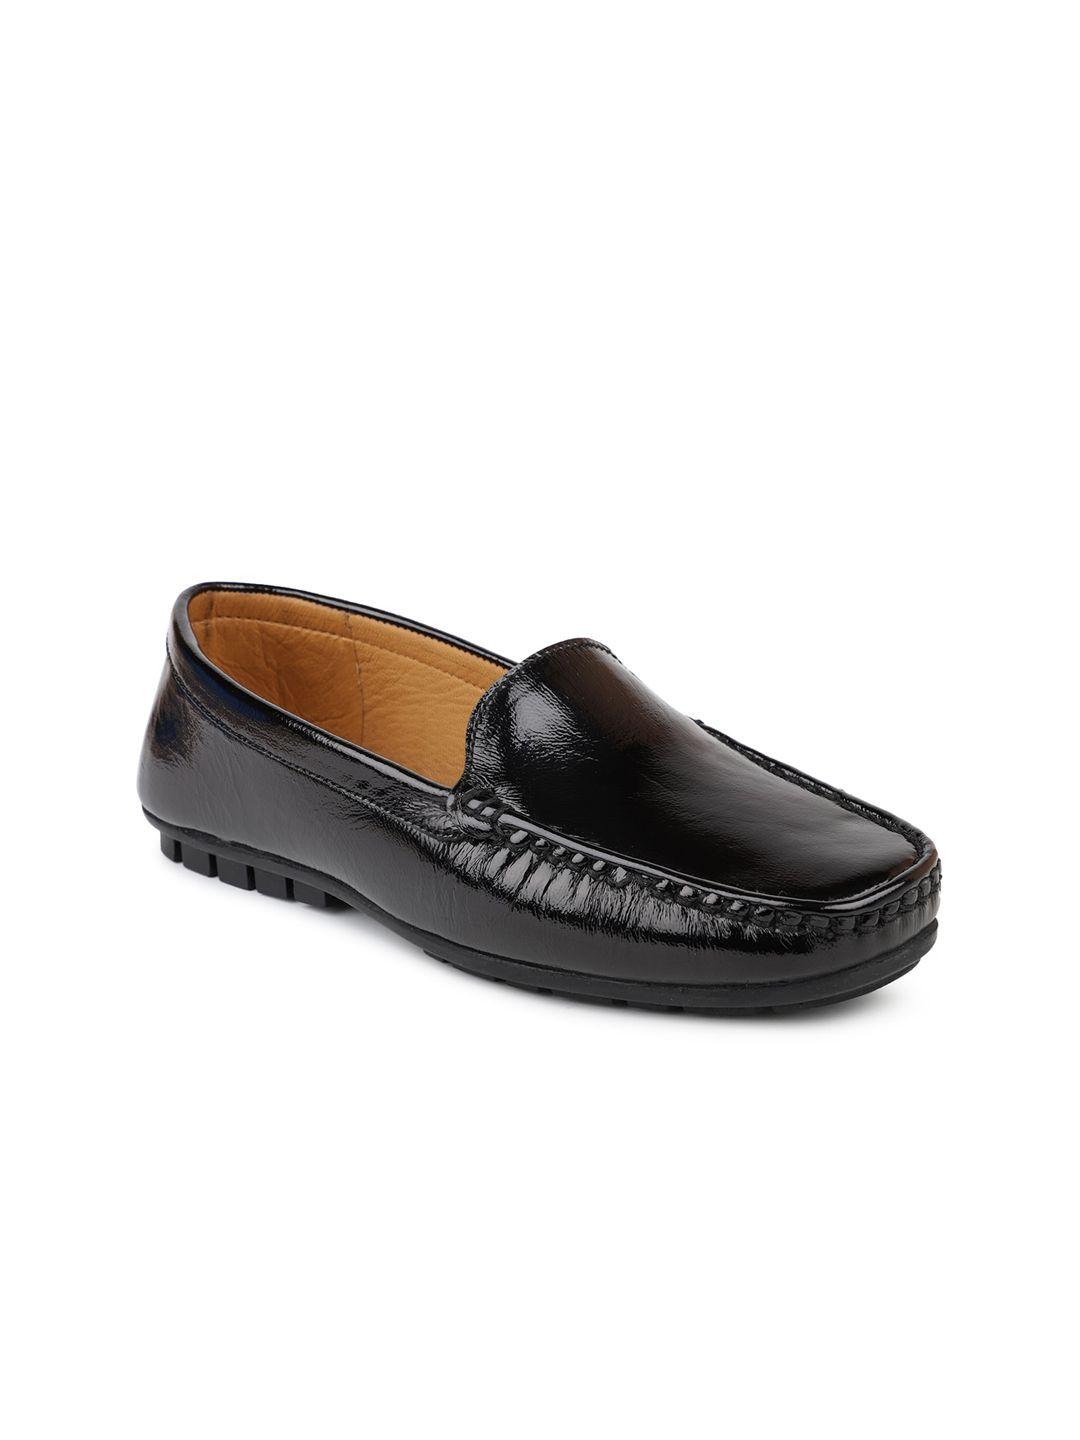 inc 5 women black textured loafers